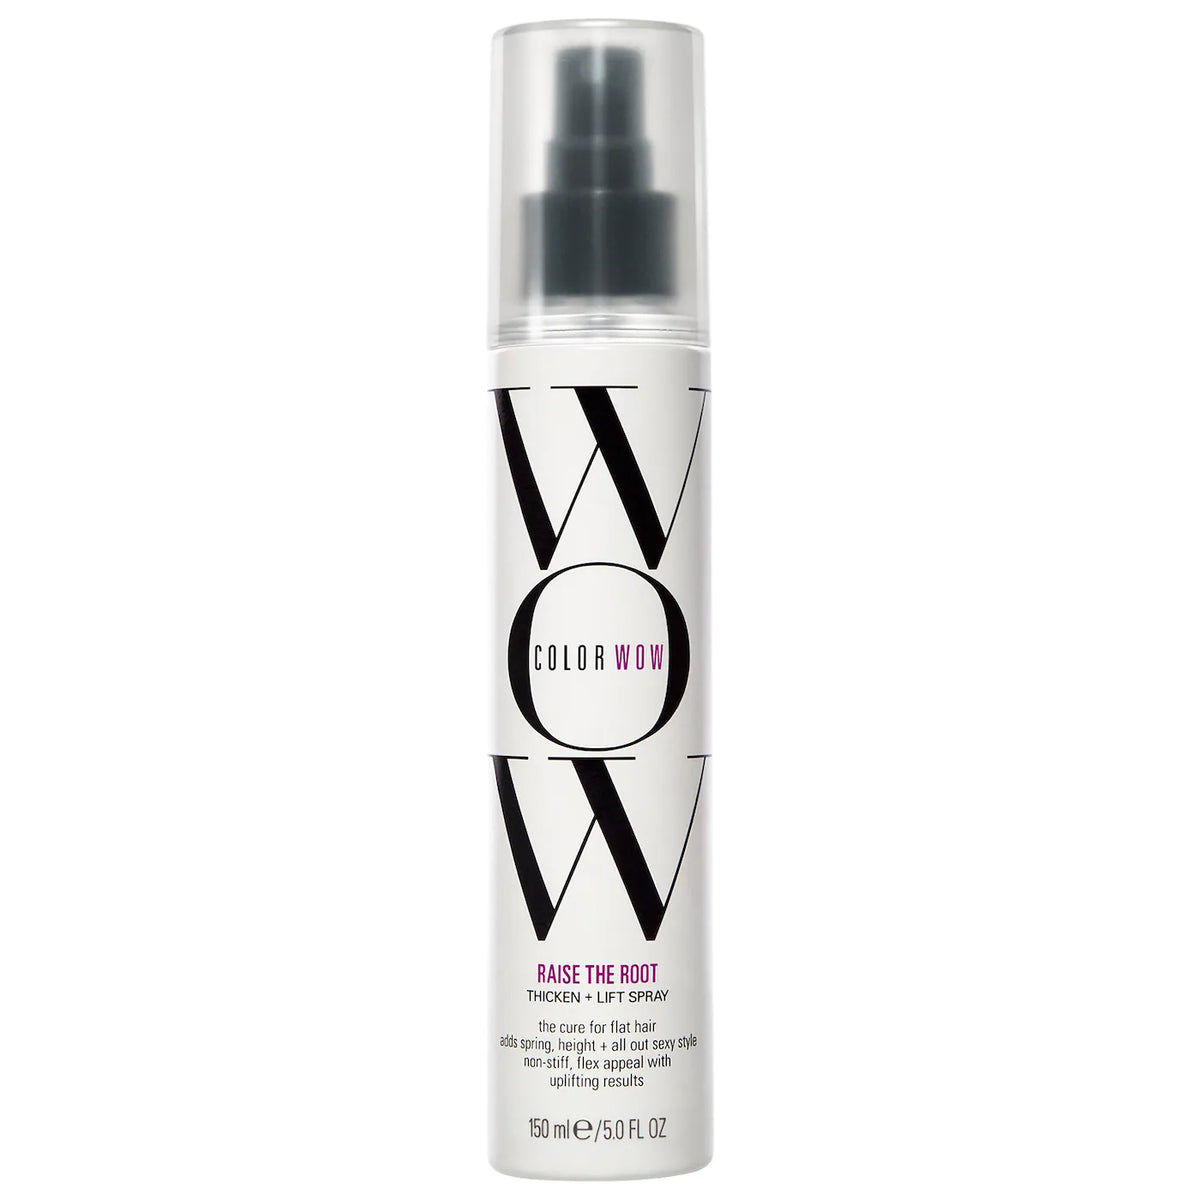 COLOR WOW Raise the Root Thicken and Lift Spray Hair Spray Volare Makeup 150 ml  